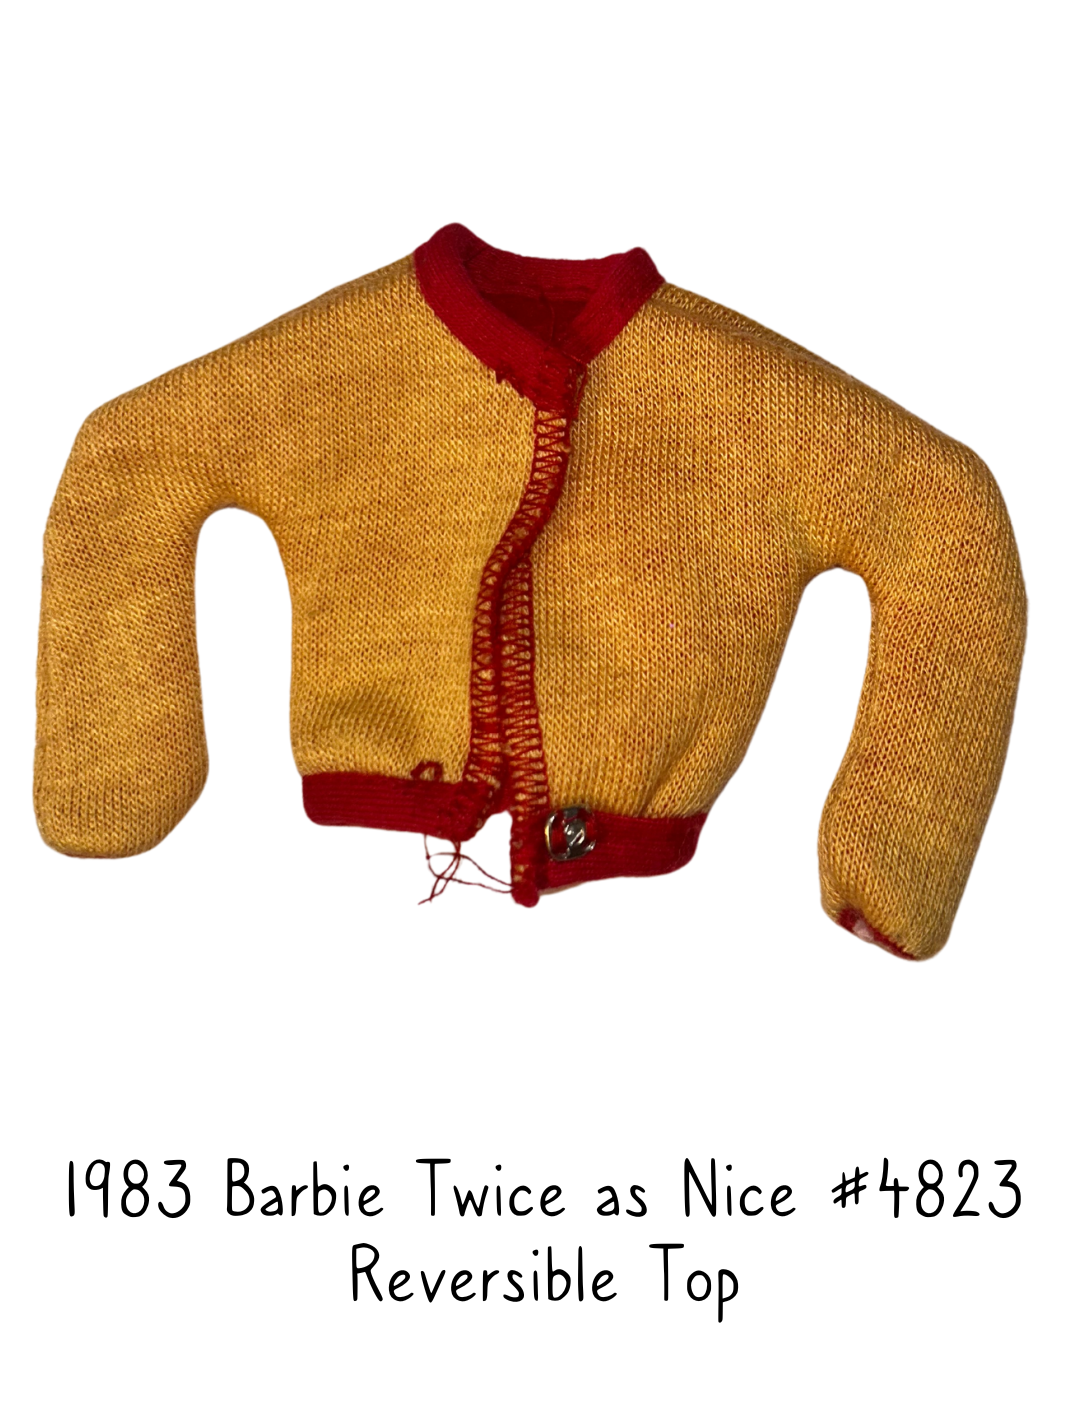 1983 Barbie Twice as Nice #4823 Reversible Yellow and Red Top